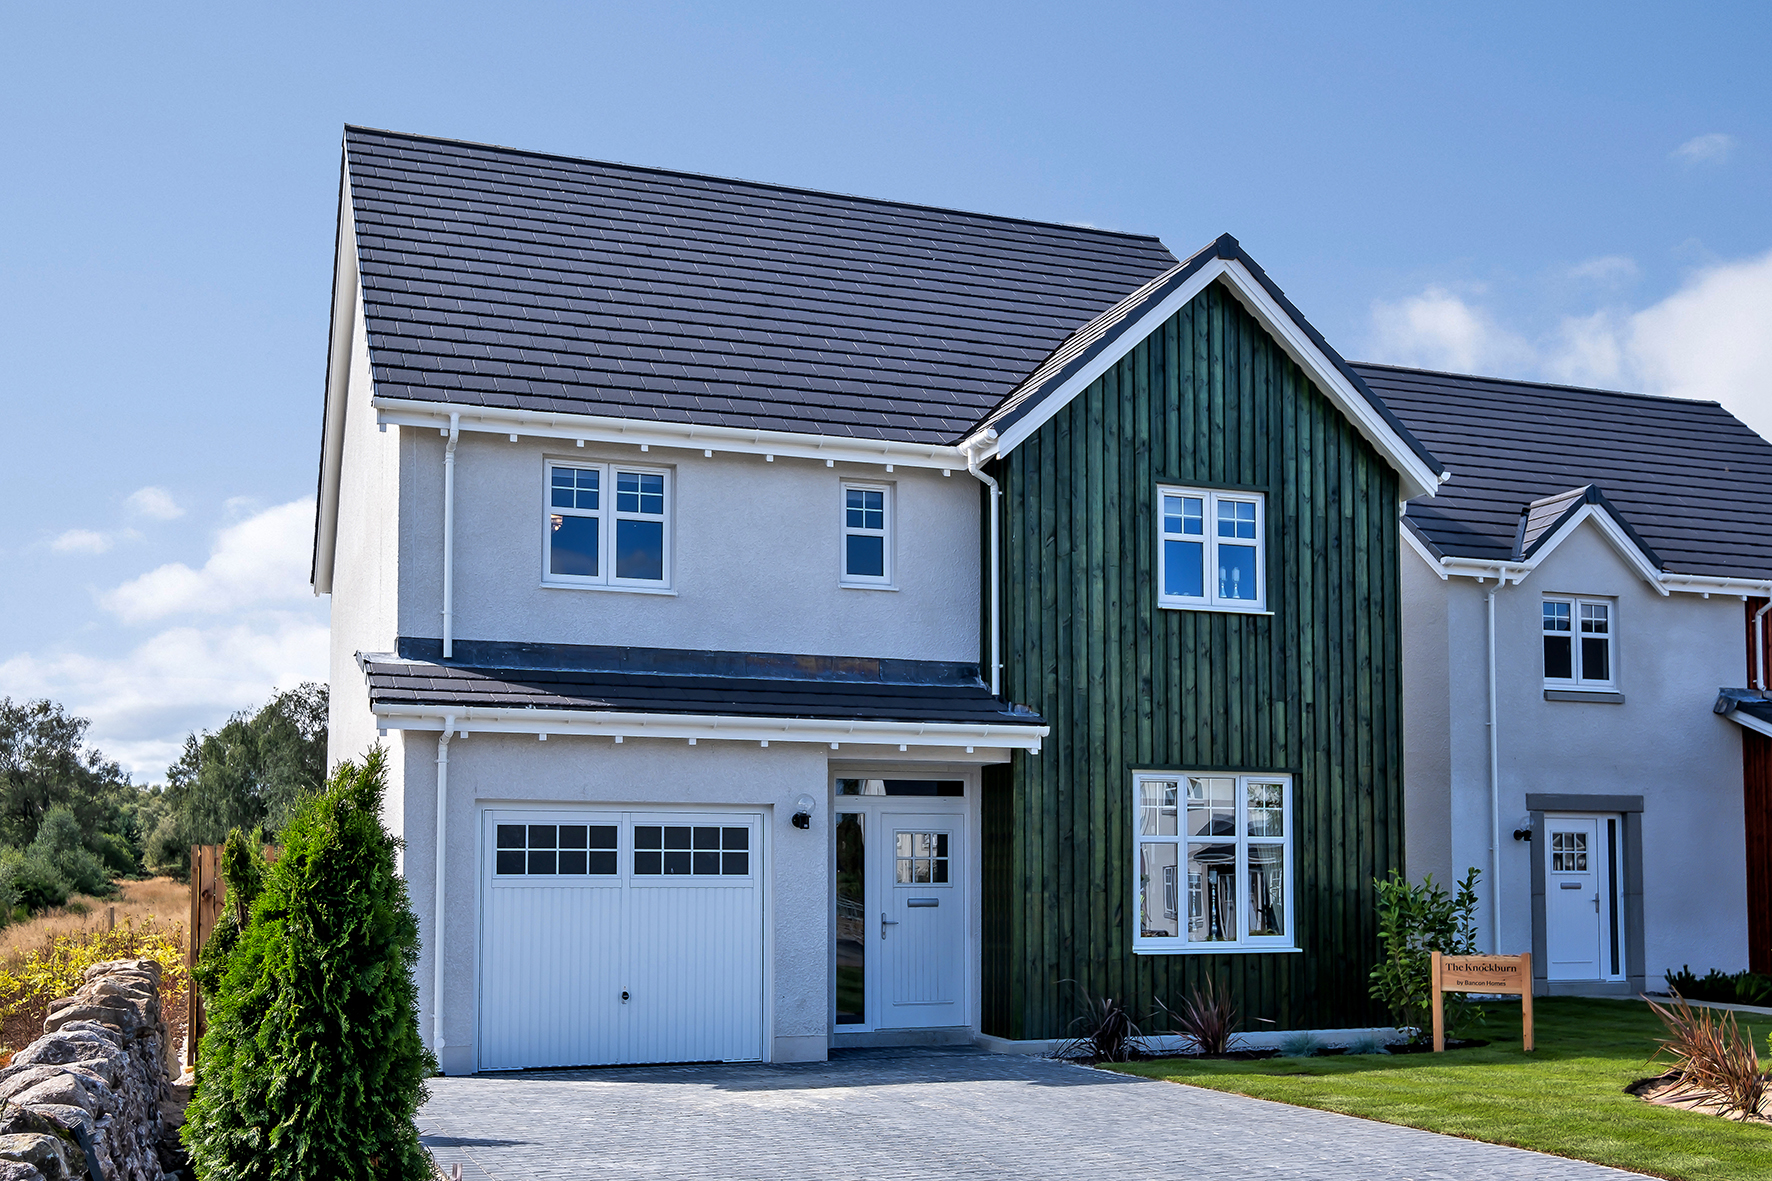 Bancon Homes obtains approval for second phase at Banchory development